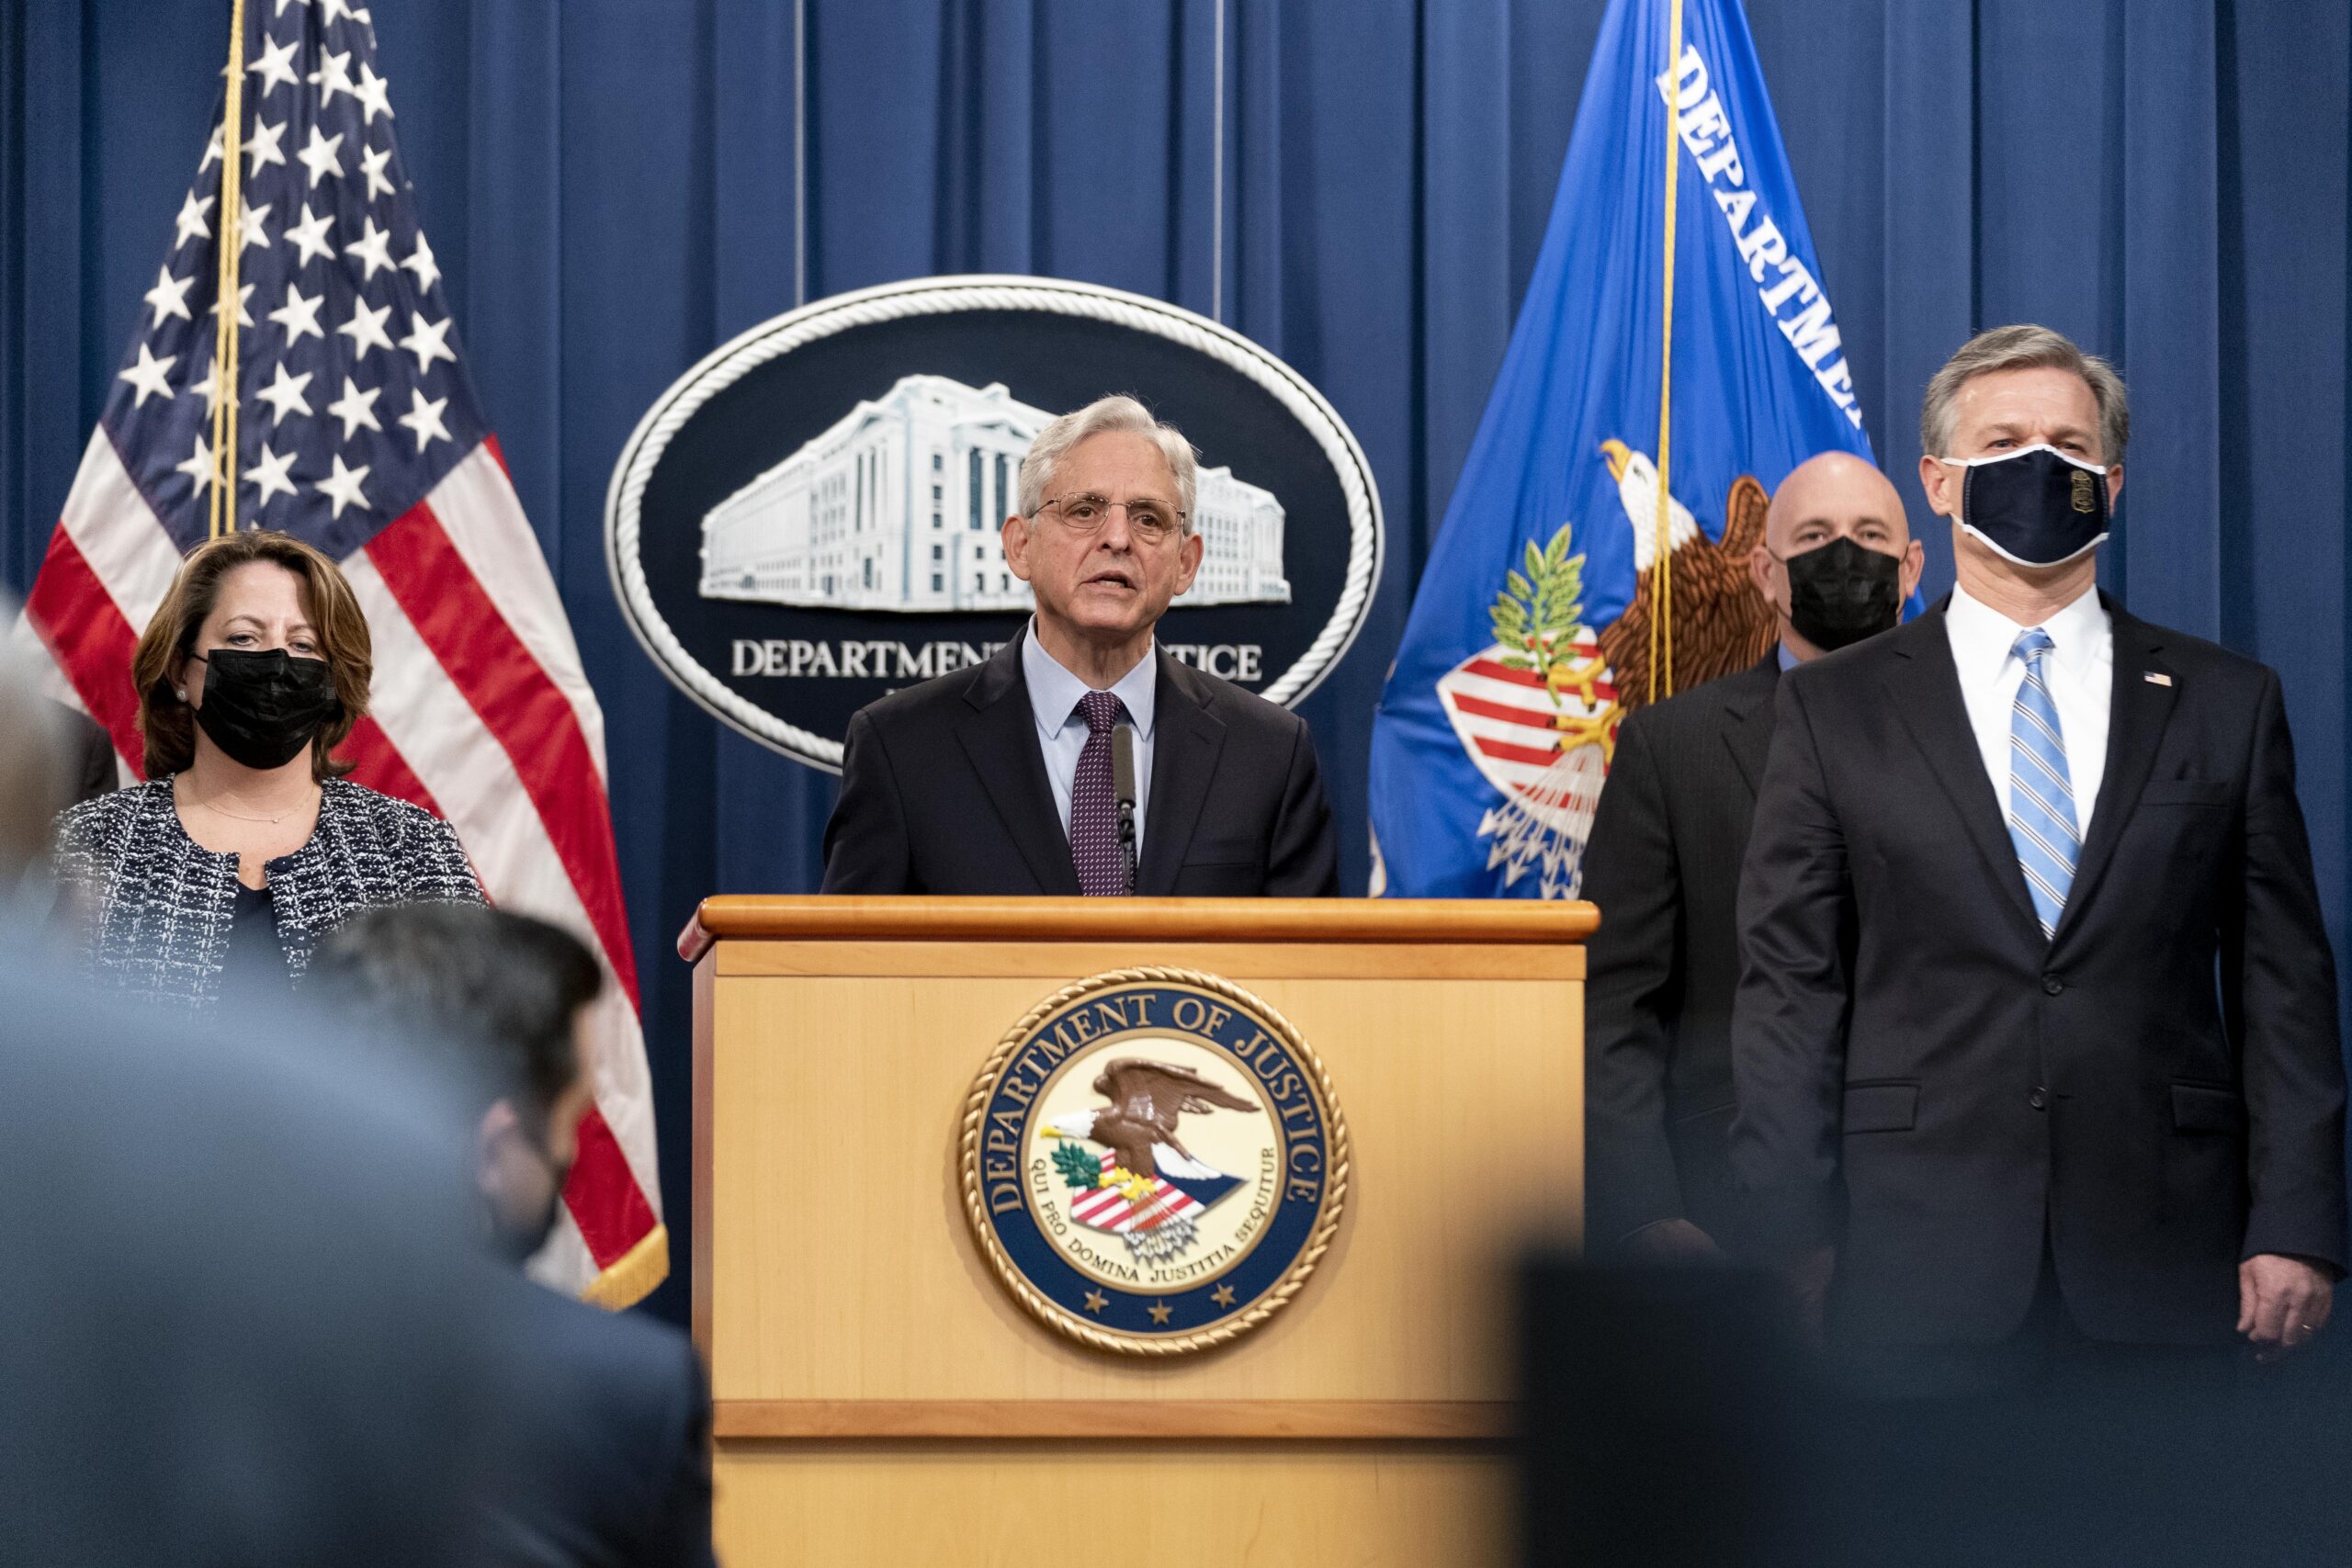 Attorney General Merrick Garland, center, accompanied by Deputy Attorney General Lisa Monaco, left, and FBI Director Christopher Wray, right, speaks at a news conference at the Justice Department in Washington, Monday, Nov. 8, 2021. (AP Photo/Andrew Harnik)